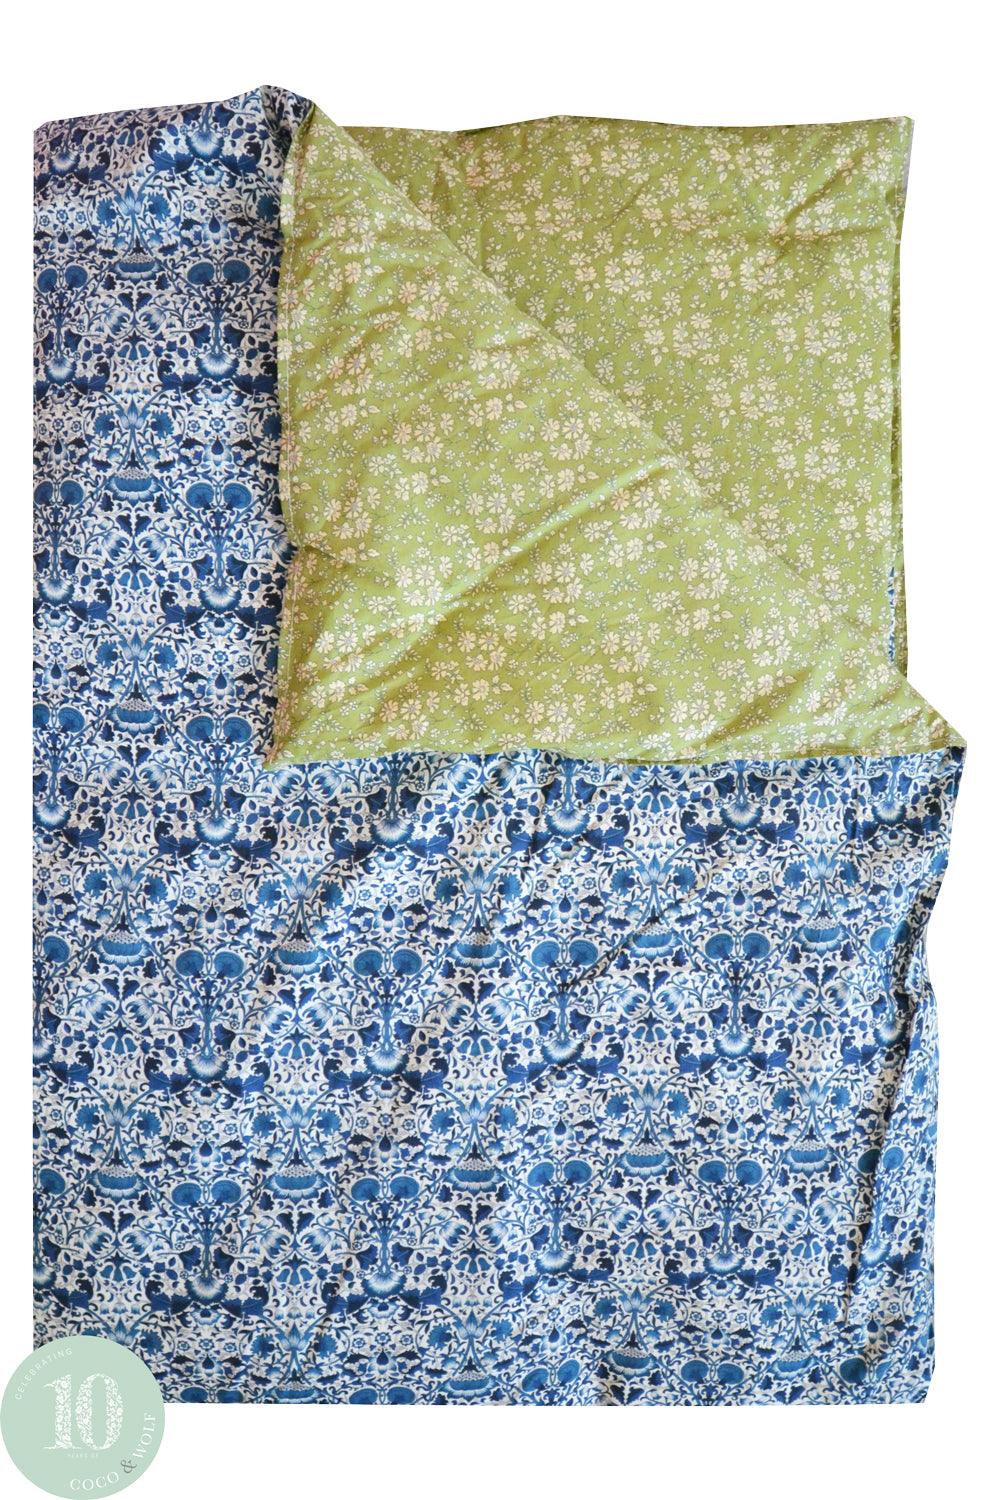 Heirloom Quilt made with Liberty Fabric LODDEN & CAPEL PISTACHIO - Coco & Wolf